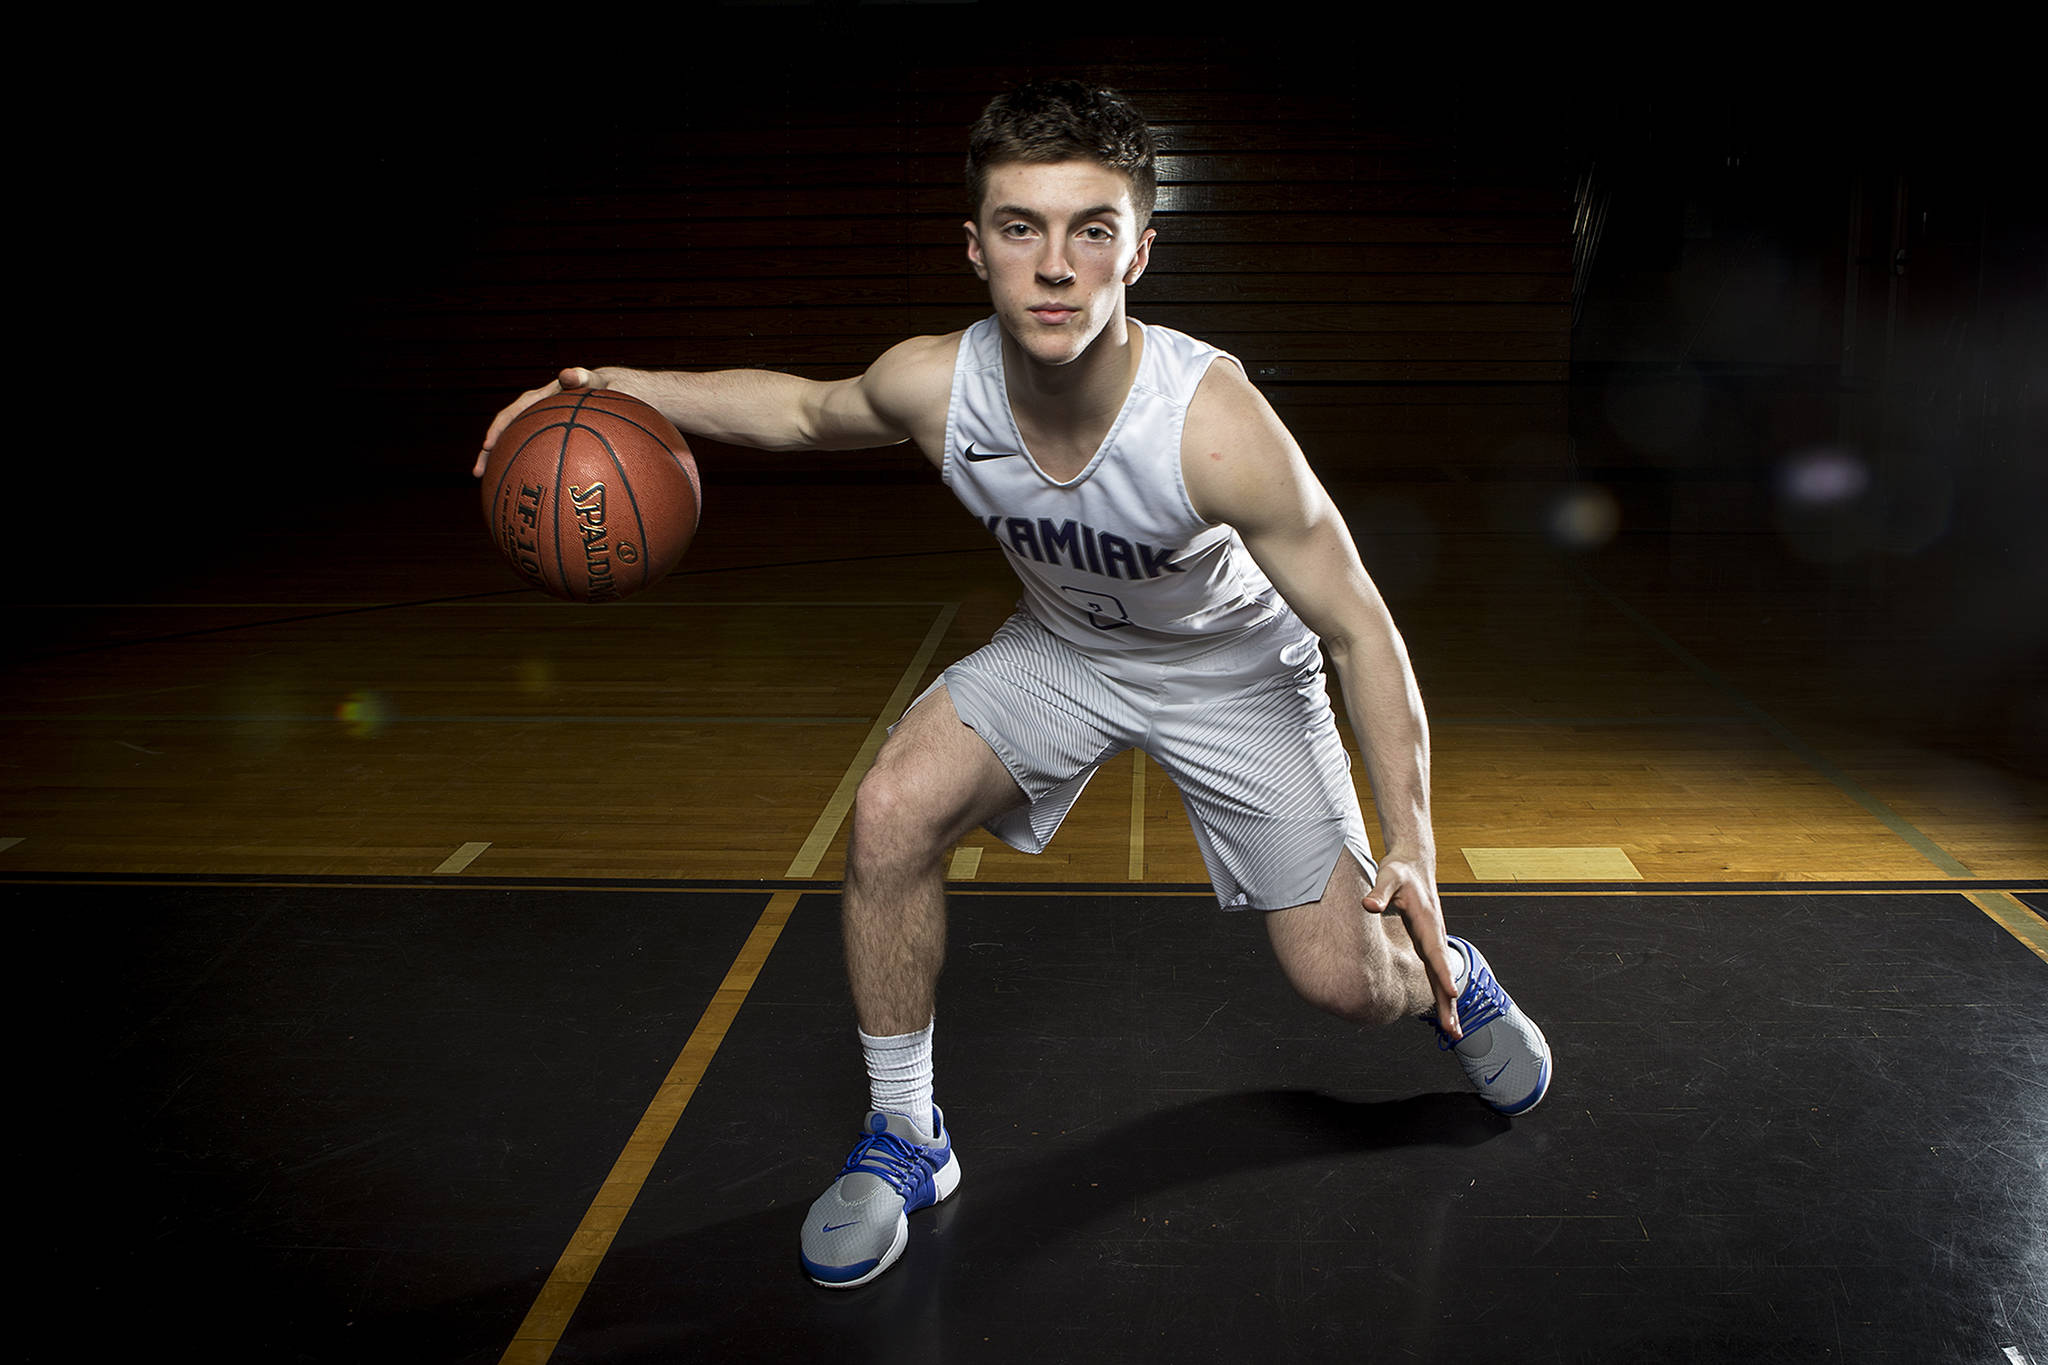 Kamiak junior Carson Tuttle is The Herald’s 2017 Boys Basketball Player of the Year. (Ian Terry / The Herald)